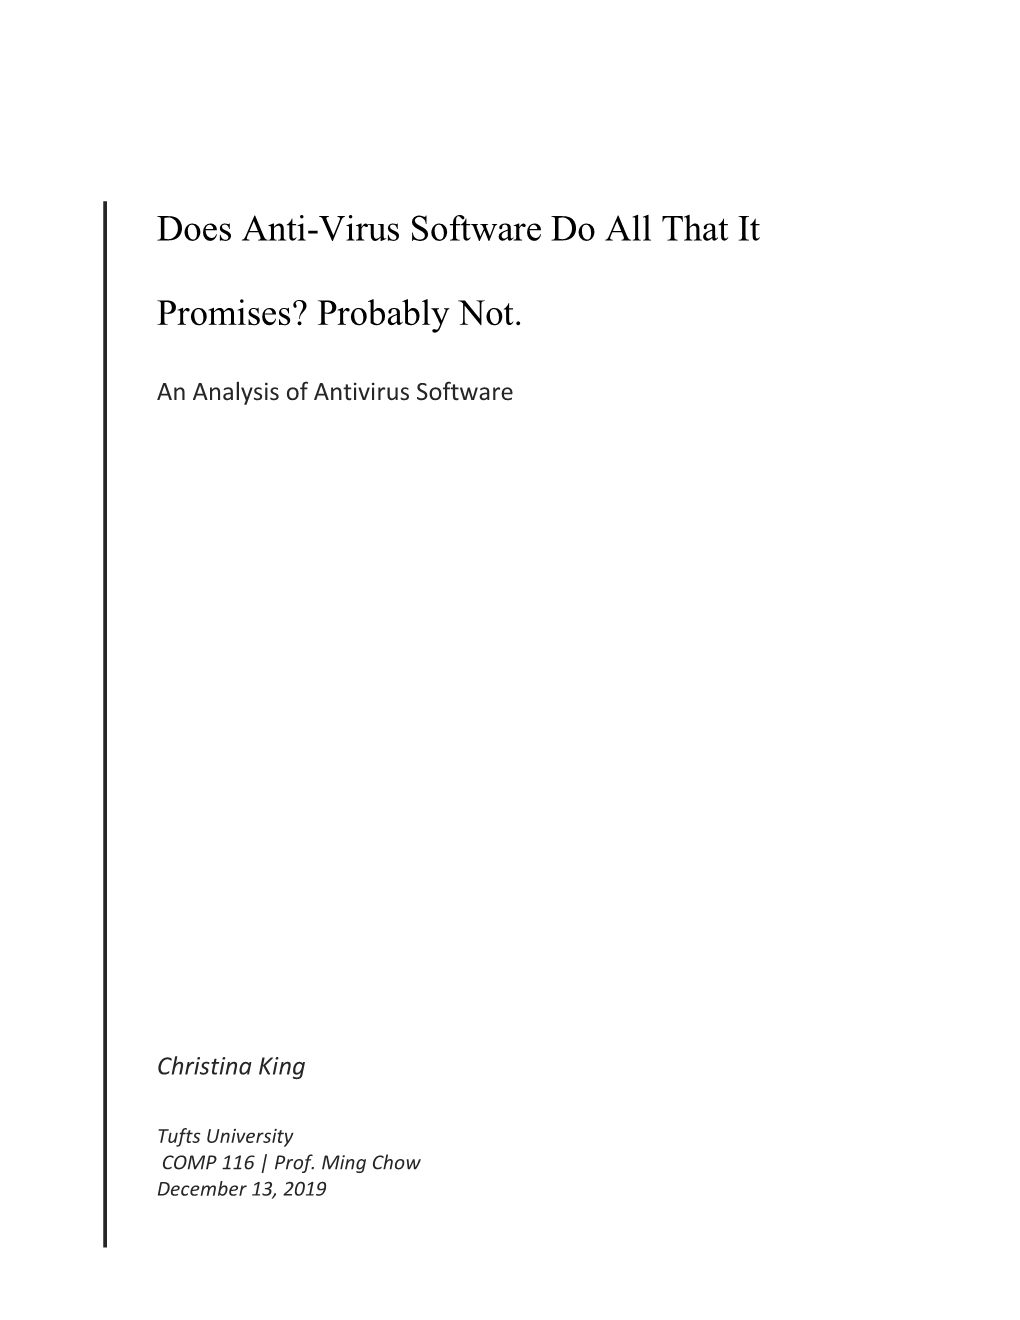 Does Anti-Virus Software Do All That It Promises?